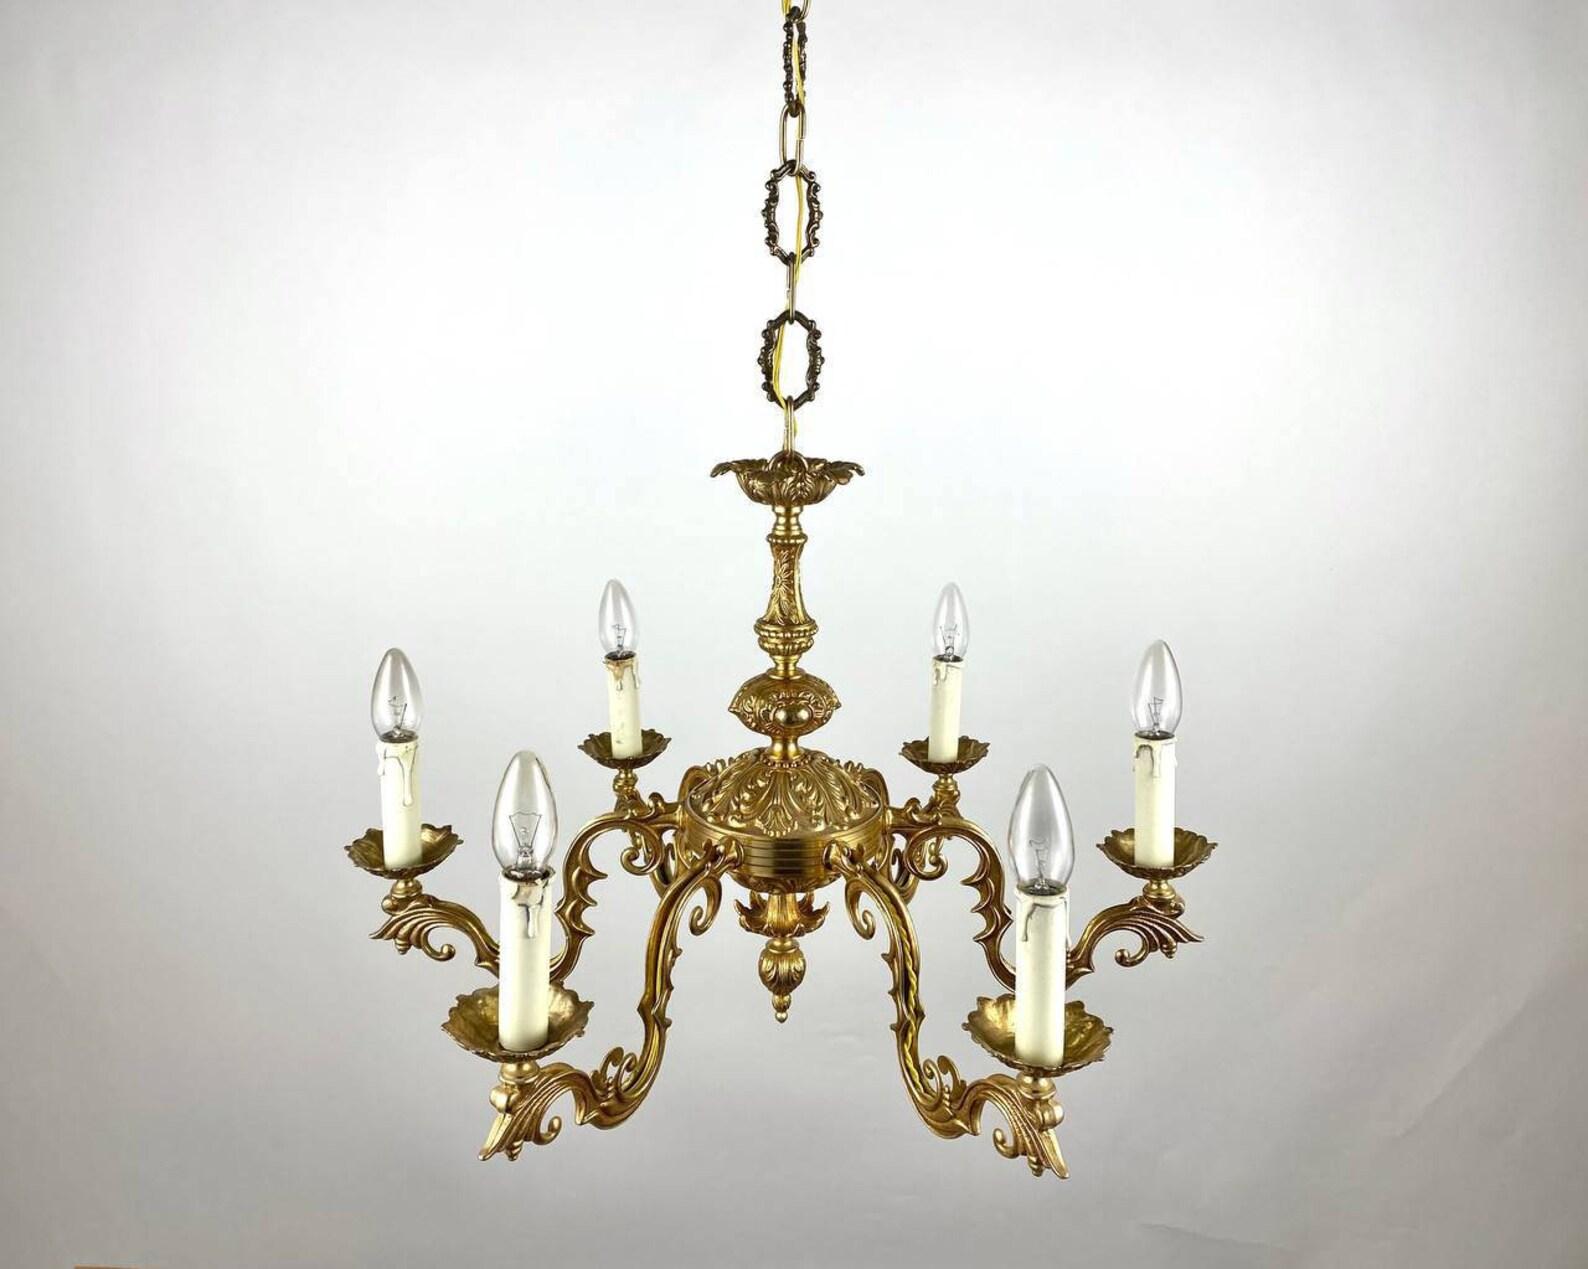 Vintage Gilt Brass Chandelier. 

French 1960s lighting. 

The material of manufacture of this unique chandelier is gilded BRASS which is characterized by increased strength, corrosion resistance and durability. 

This brass chandelier is made in the